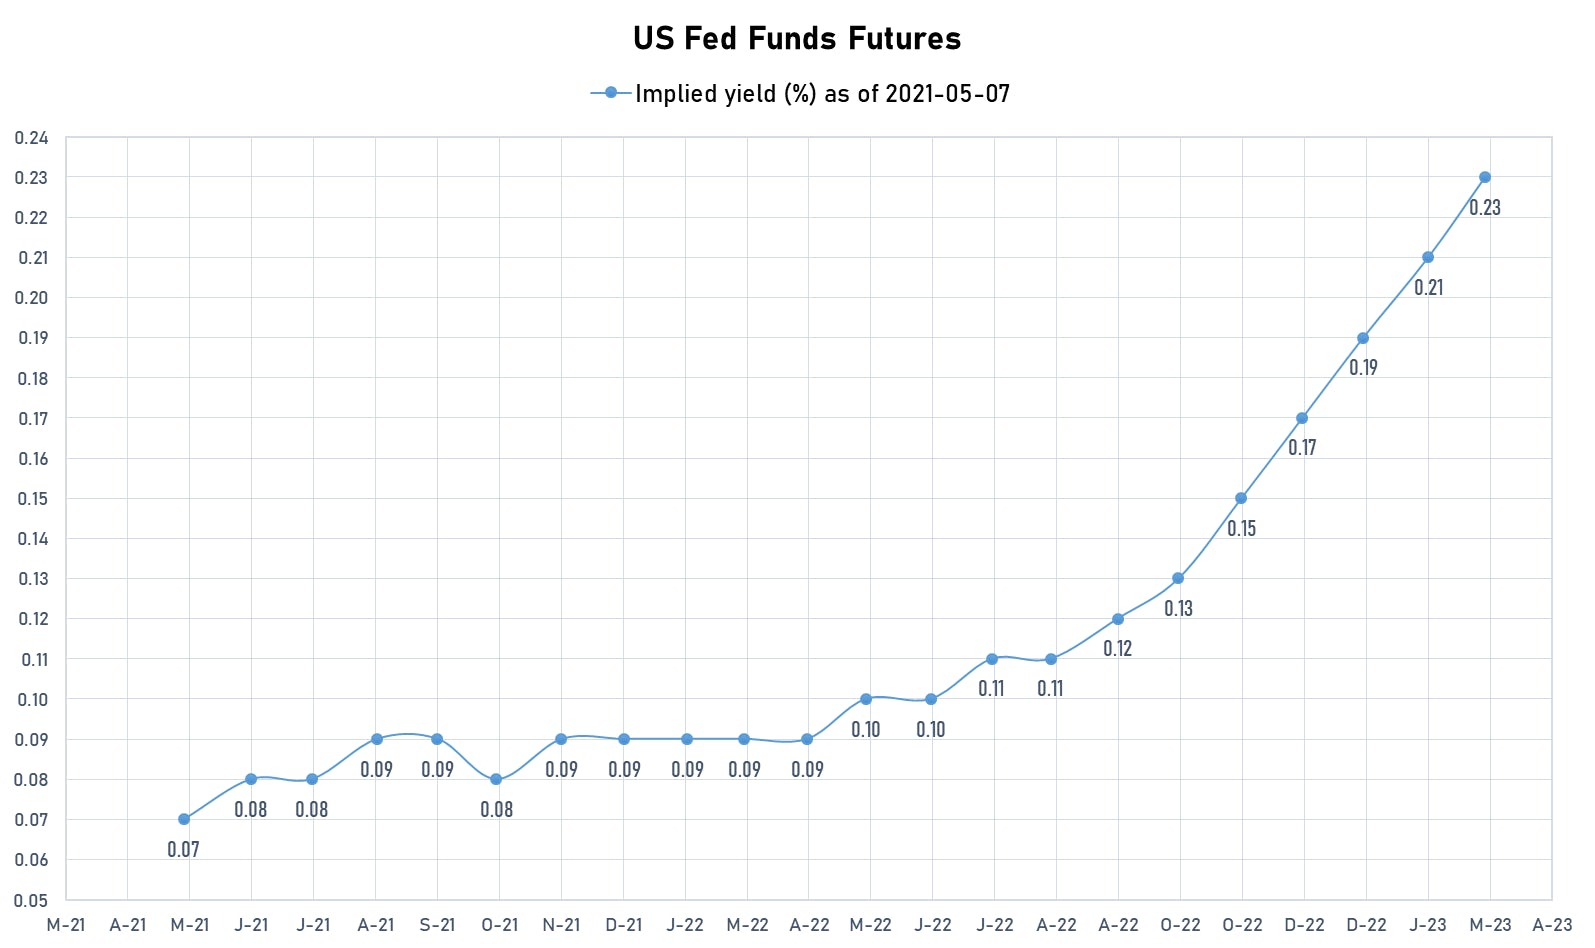 Implied Yields on Fed Funds Futures | Sources: ϕpost, Refinitiv data